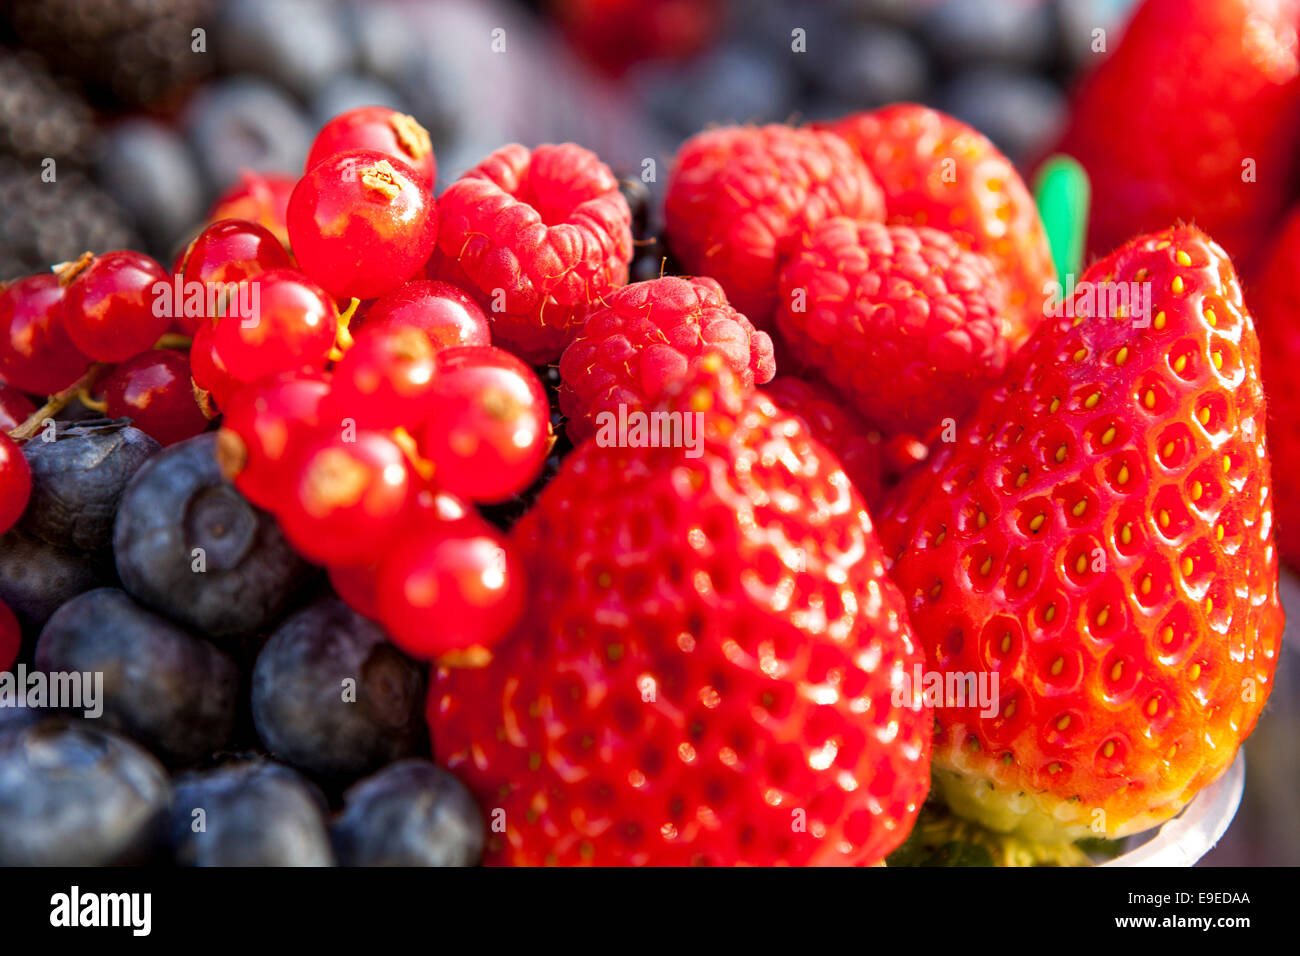 Mixed berries blueberry strawberry currants Juicy Sweet fruits Close up Stock Photo